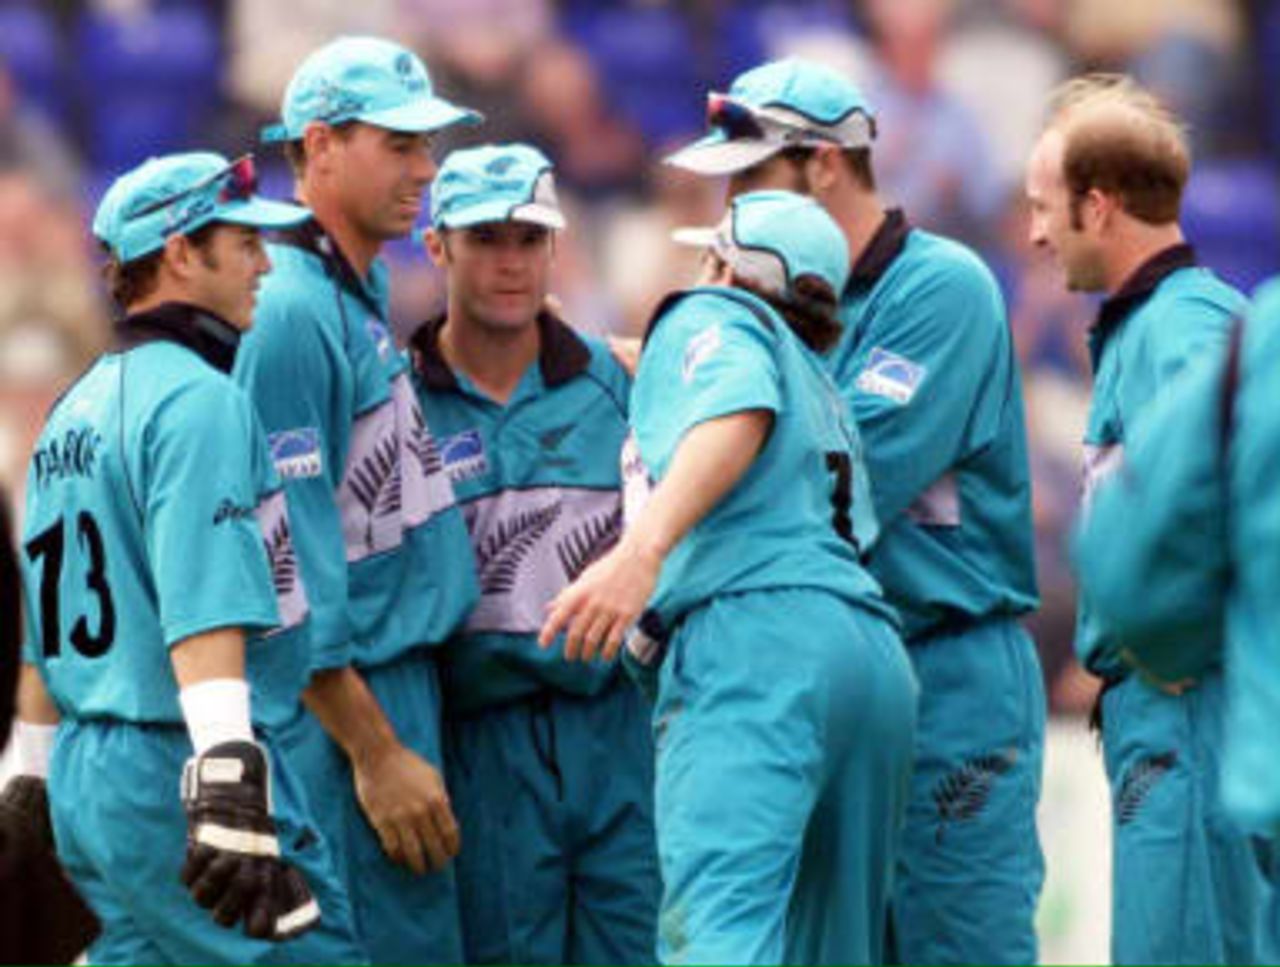 New Zealand's Nathan Astle (C) is congratulated by teammates after taking a great catch from Australia's Steve Waugh off the bowling of Chris Harris (R) 20 May 1999, during their Cricket World Cup match in Cardiff.